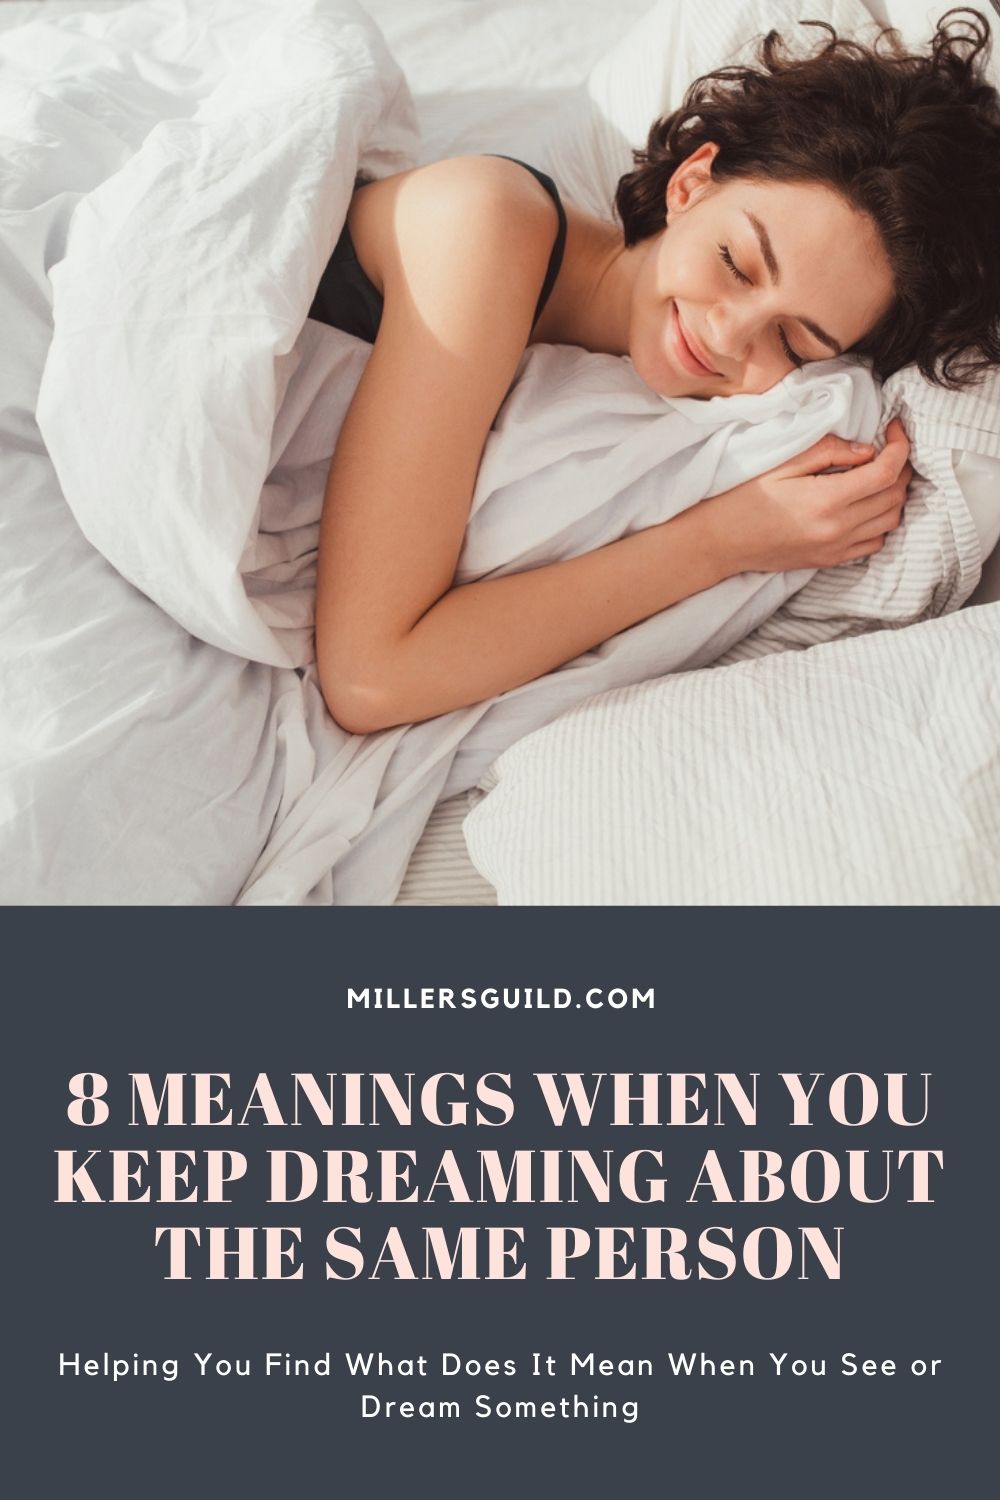 8 Meanings When You Keep Dreaming About the Same Person 1